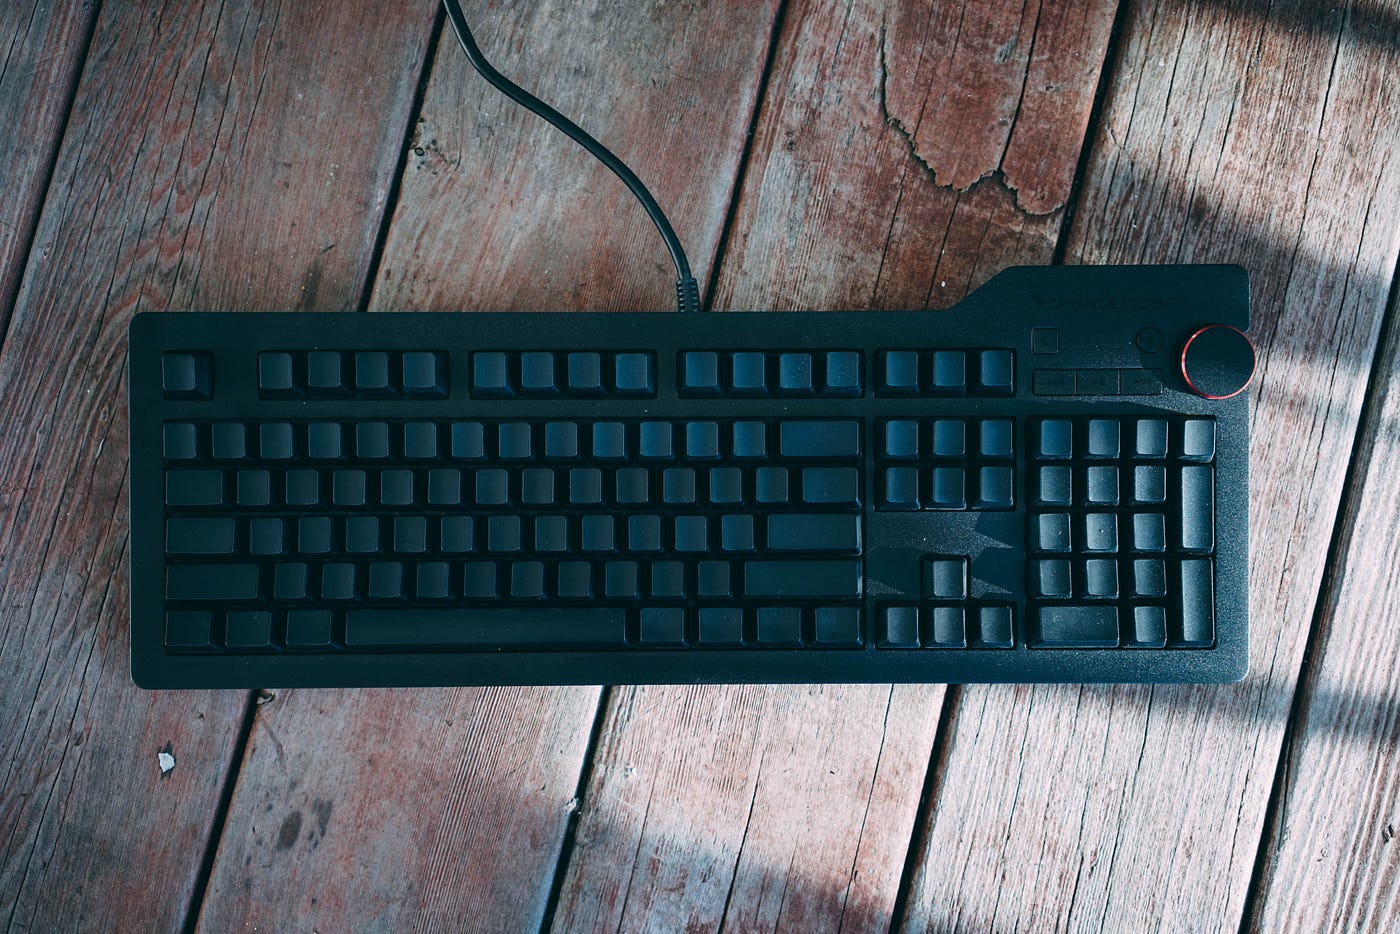 Das Keyboard - The Ultimate Mechanical Keyboard Experience for Overachievers